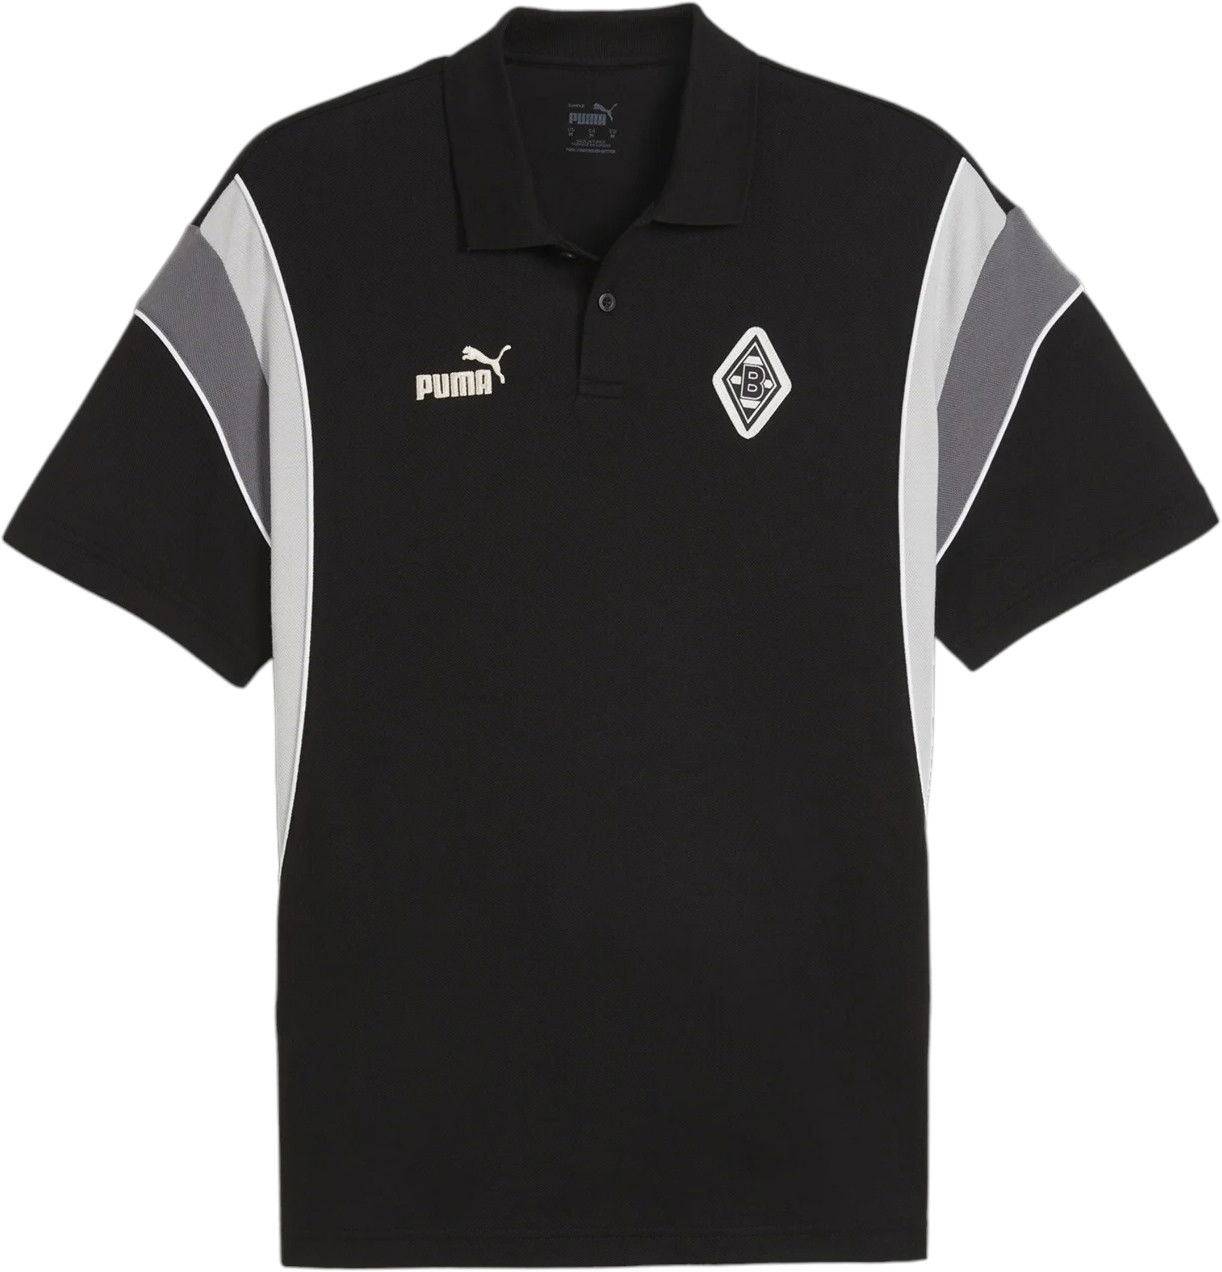 BMG Archive Polo Shirt